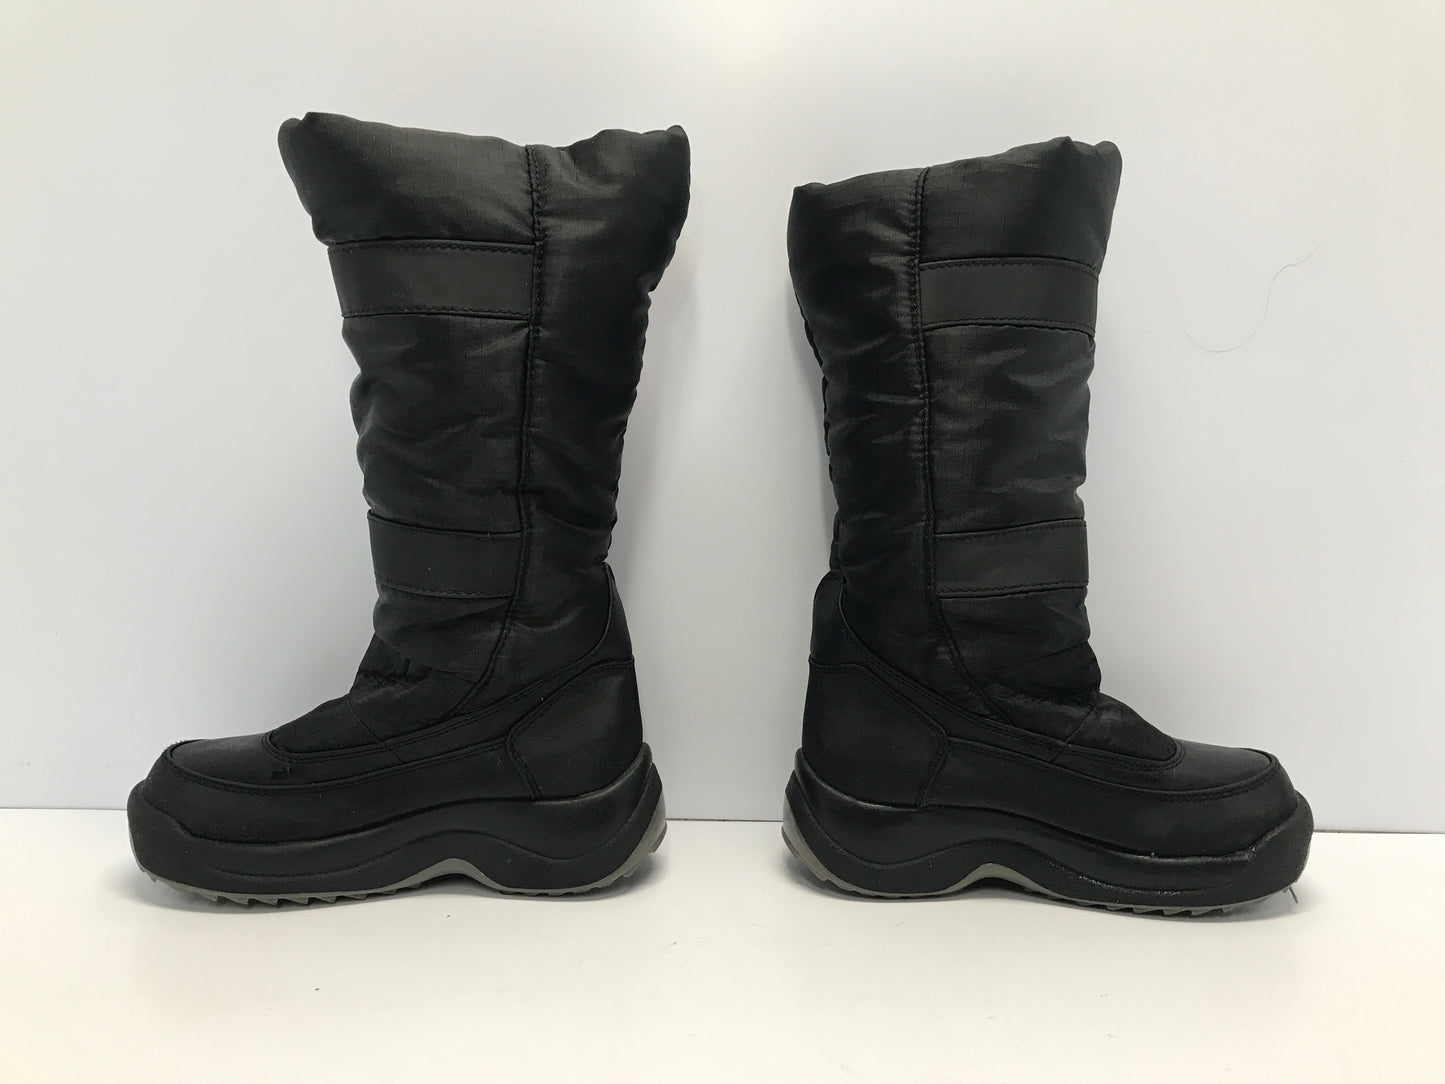 Winter Boots Child Size 12 Cougar  Black Fleece Lined Easy off and on